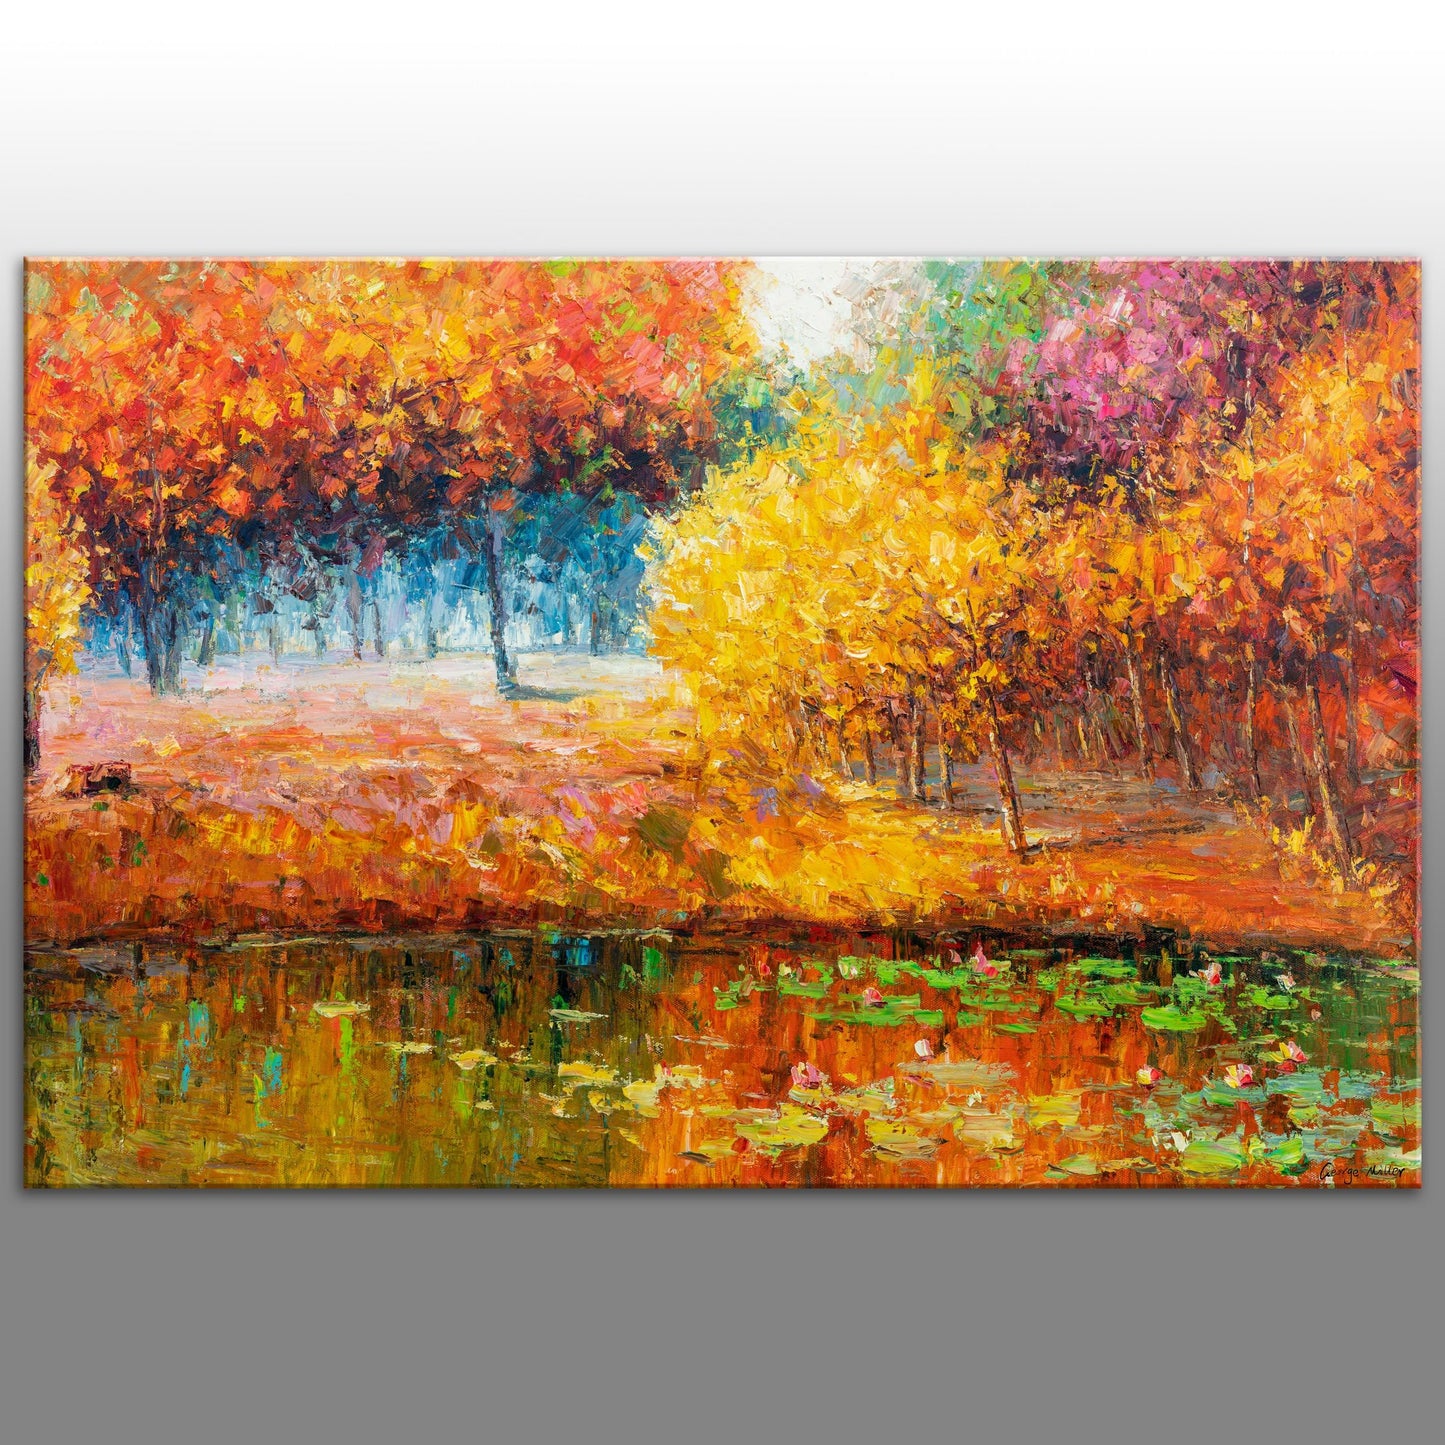 Autumn Forest Landscape Oil Painting, Large Painting, Contemporary Painting, Abstract Art, Original Art, Bedroom Decor, Large Oil Painting